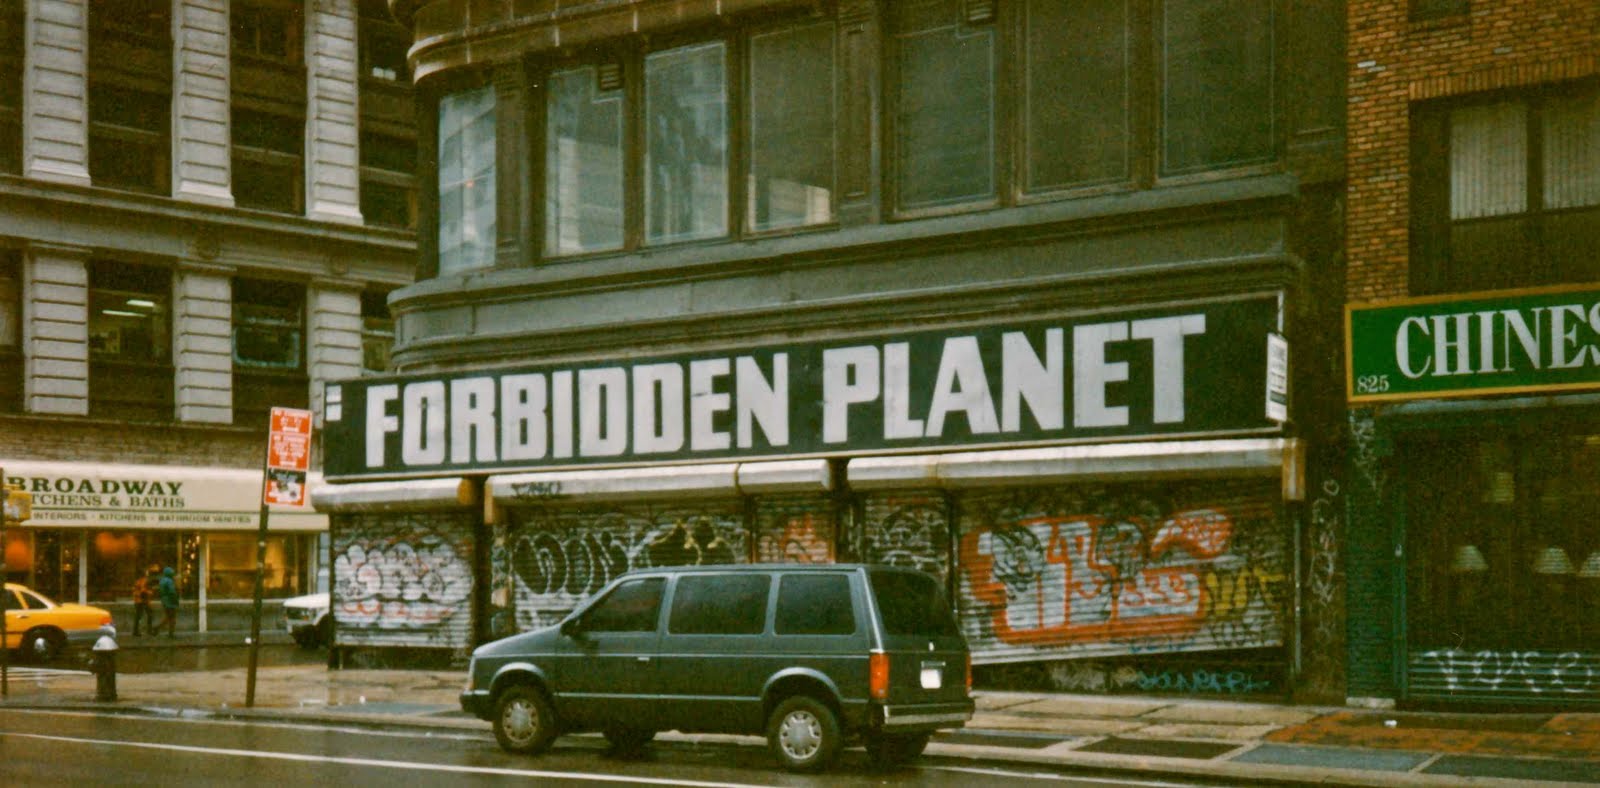 NYC's Forbidden Planet comics store moving to bigger space